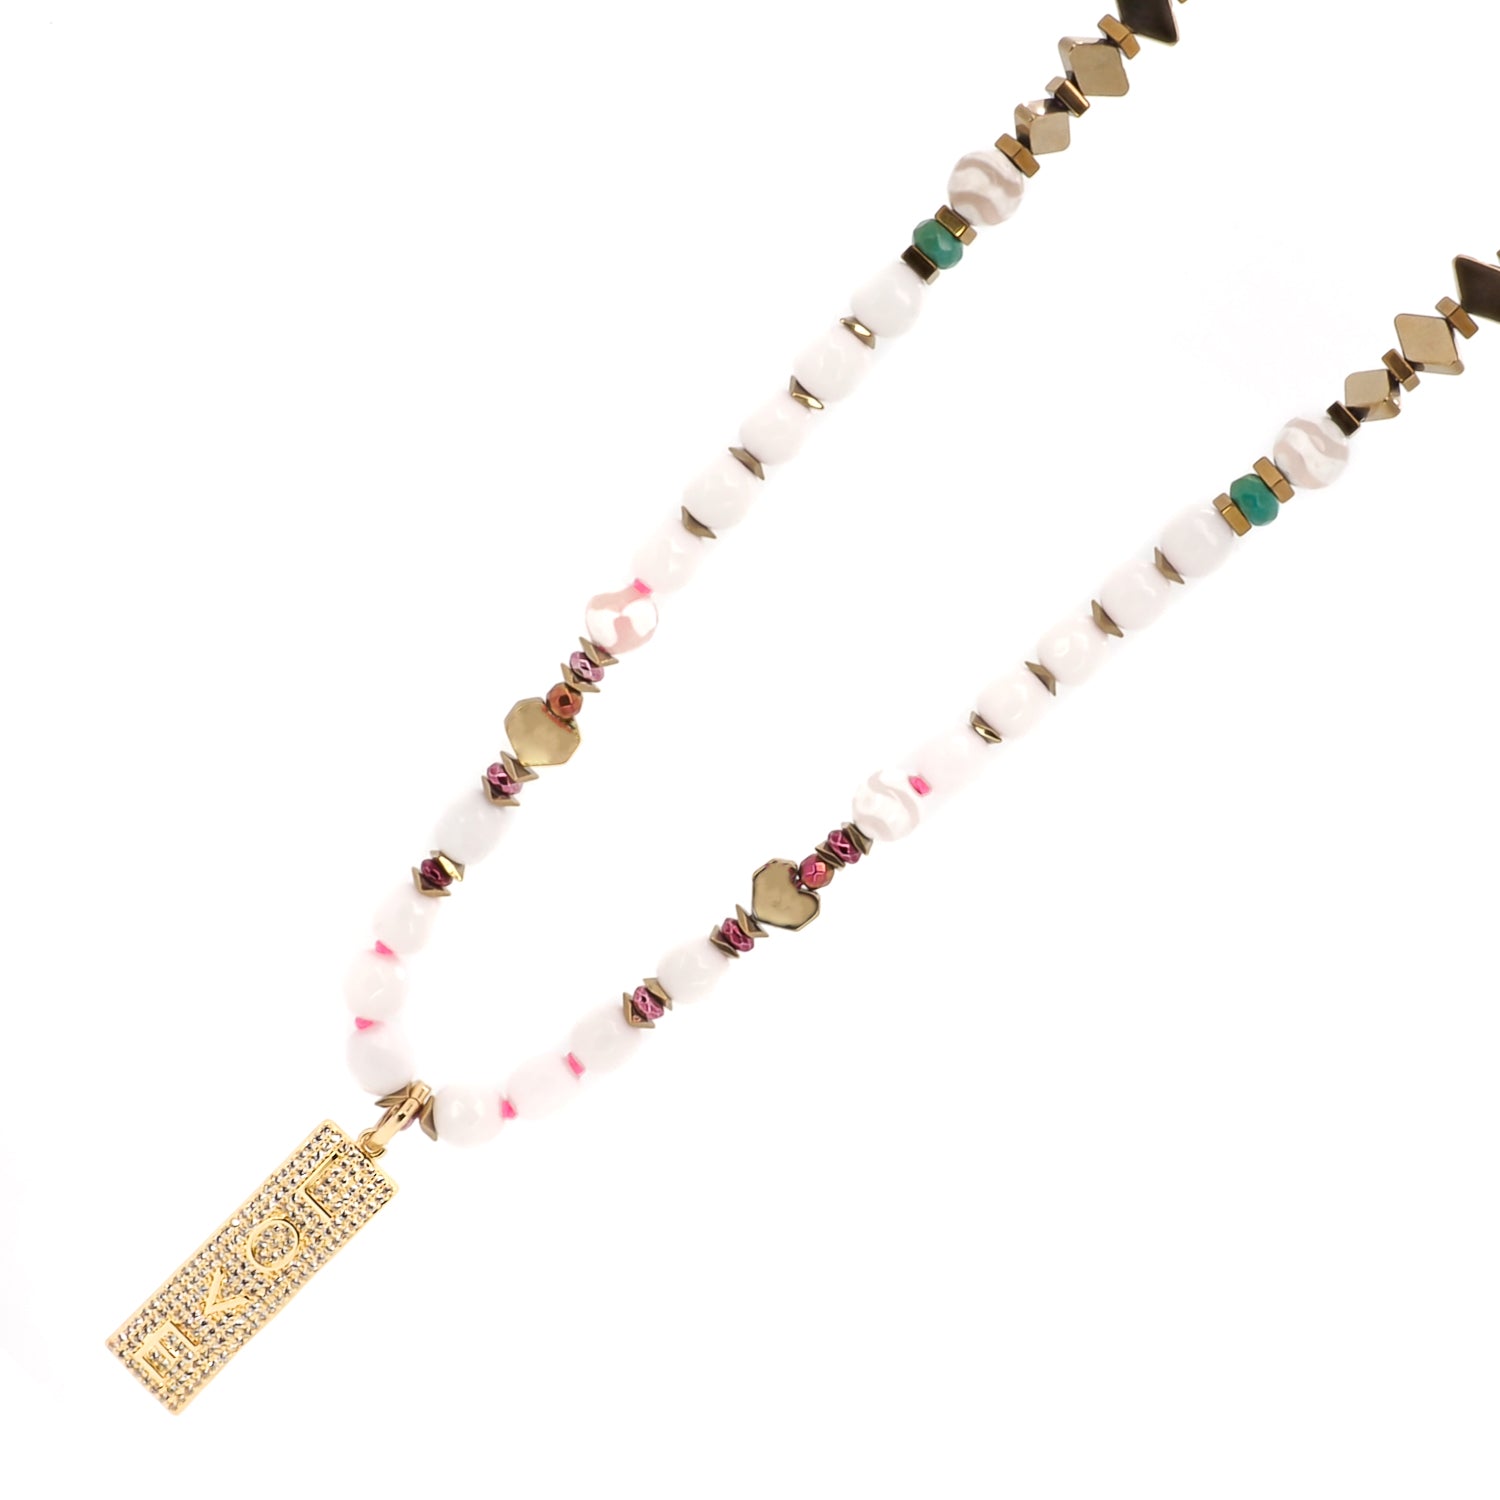 Power Of Love Necklace, a meaningful accessory that embodies the power of love, luck, and prosperity.